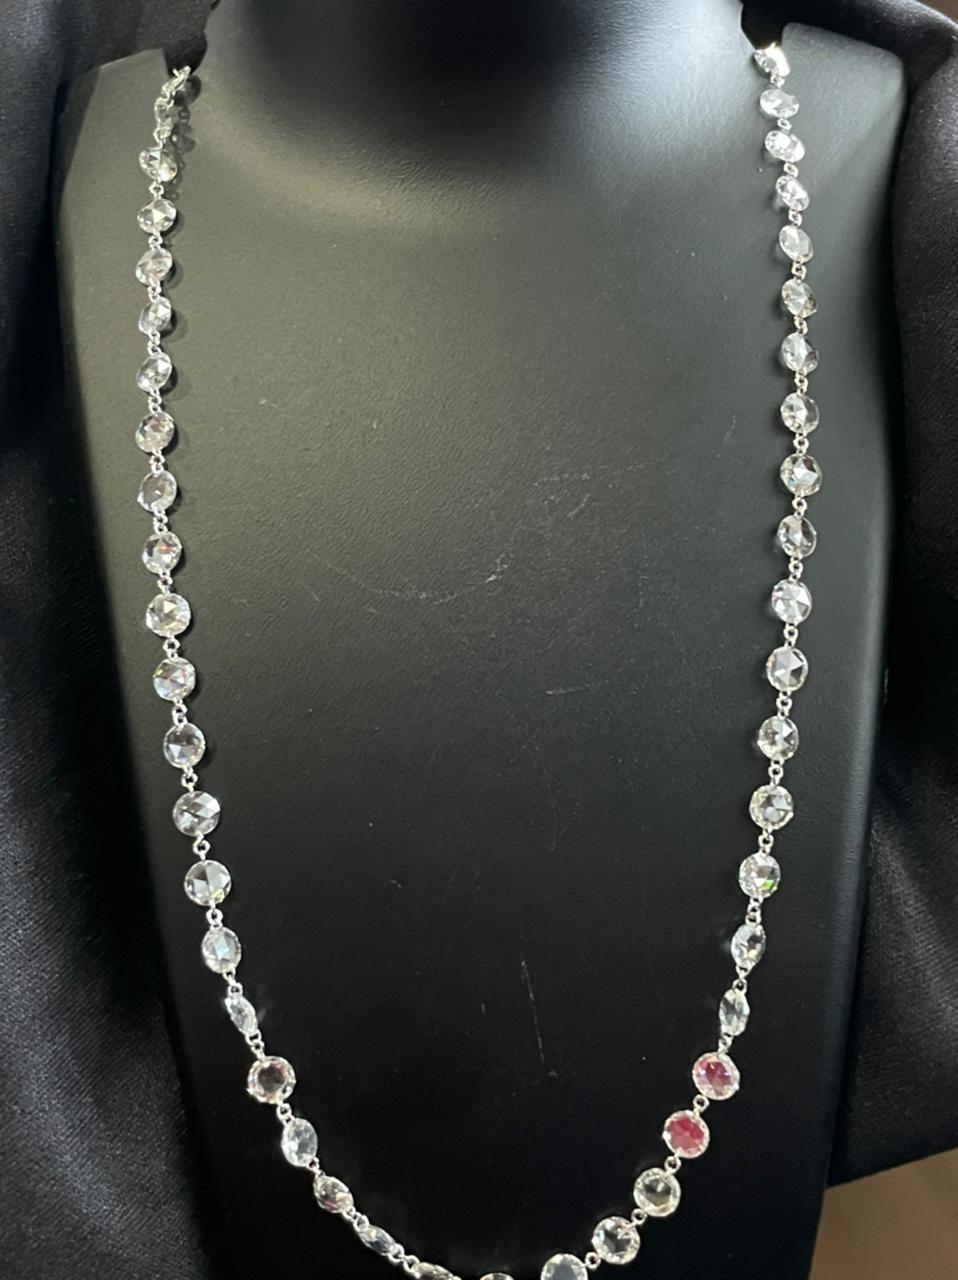 PANIM 10.95cts Rosecut Diamond Necklace in 18 Karat White Gold

In this necklace rosecut diamonds are evenly spaced on a white gold chain. This is a piece that can be worn everyday, alone or layered with other necklaces.

18K White Gold
10.95 cts